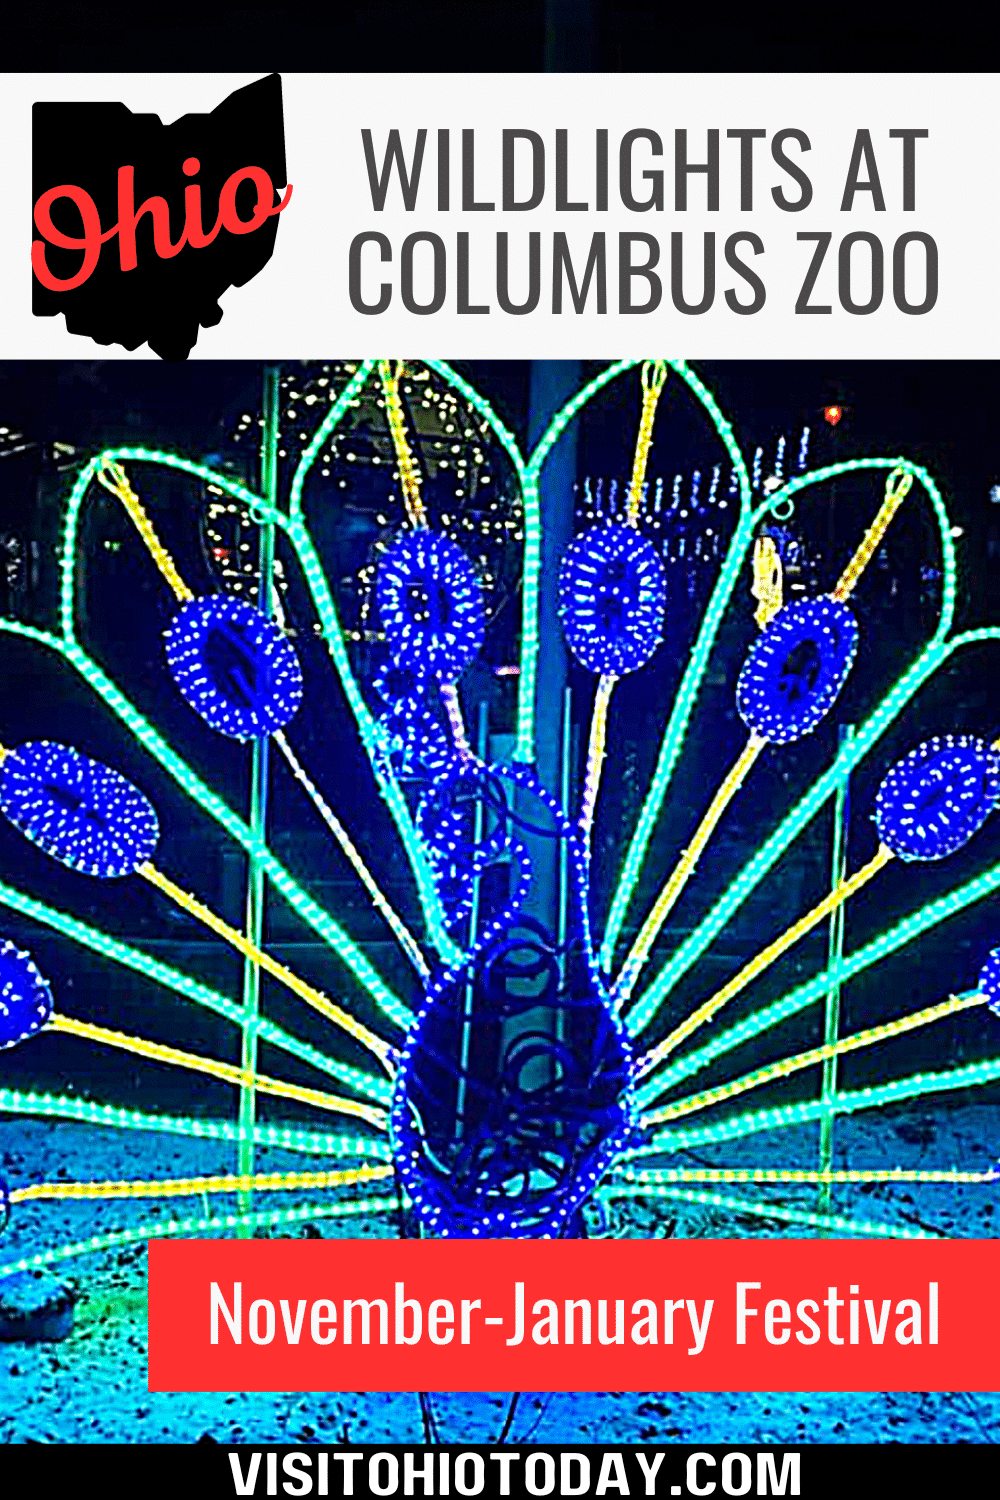 Wildlights at Columbus Zoo is a holiday lights festival that takes place at the Columbus Zoo and Aquarium from November to January